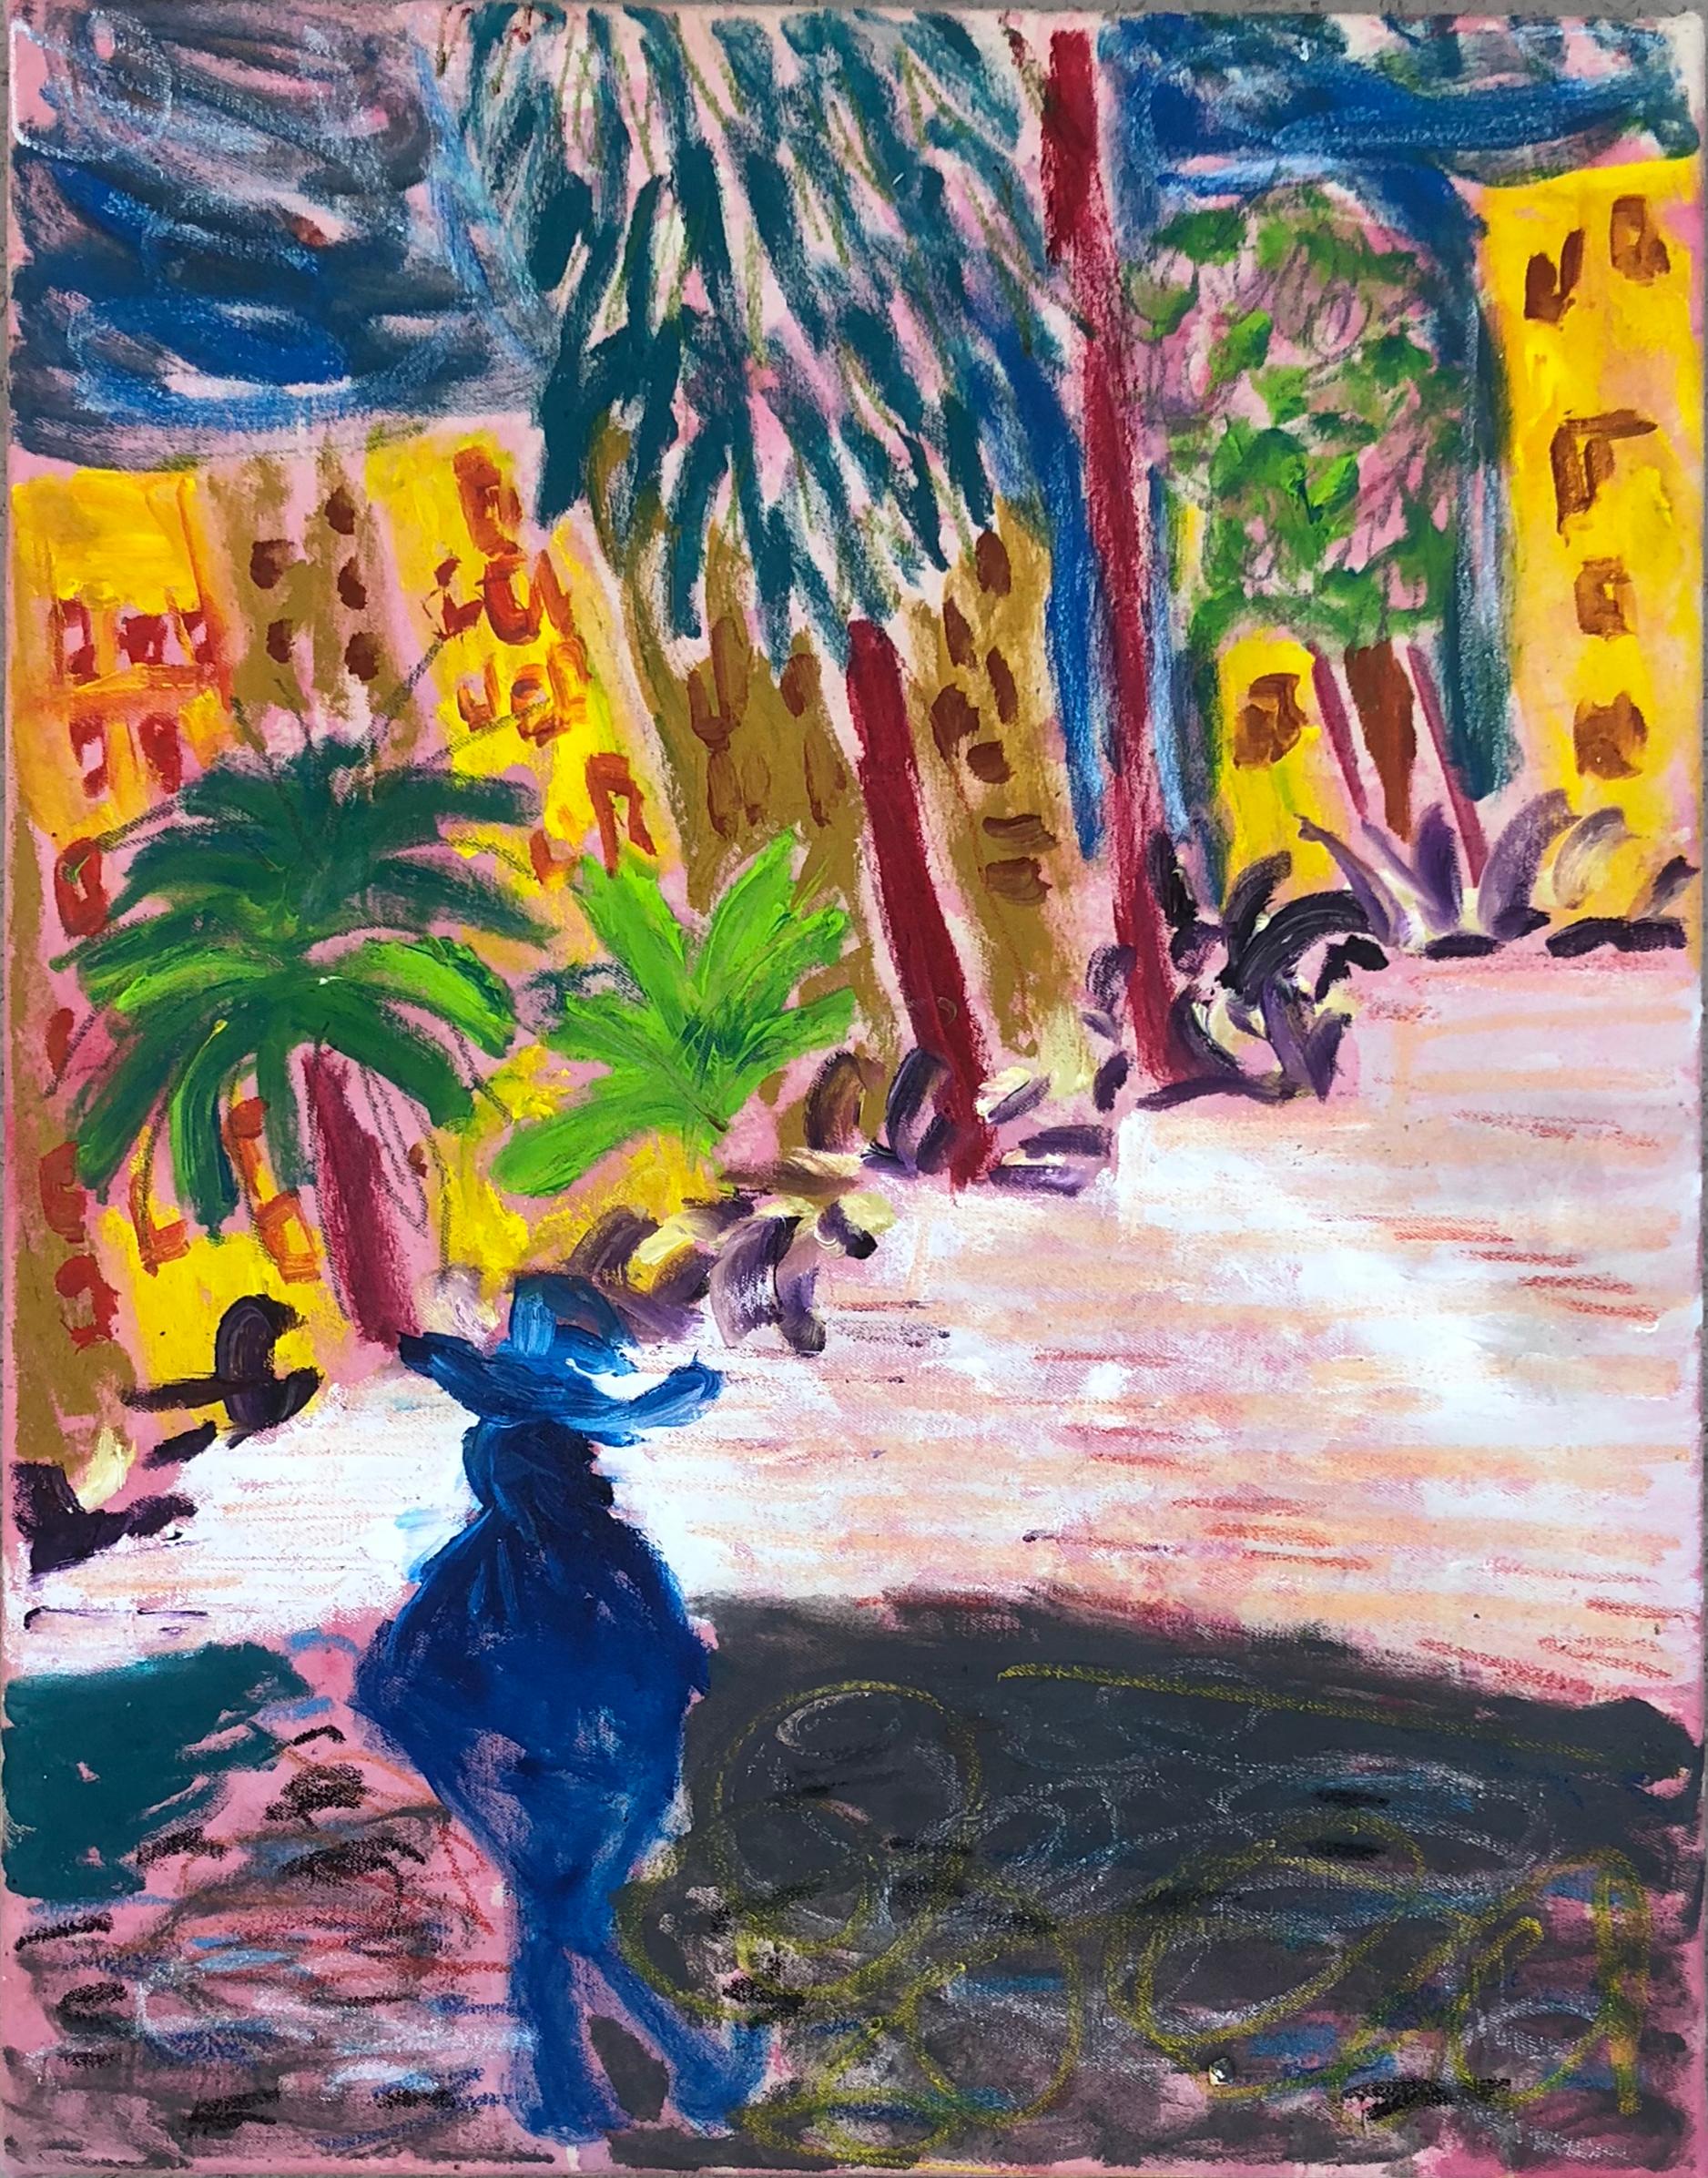 A man with a hat walking down the streets of a Mediterranean village painted by Tanja Ritterbex while being on vacation. 

Tanja Ritterbex has been called the Lady Gaga of contemporary art. She makes bolds paintings, videos (vlog's), and